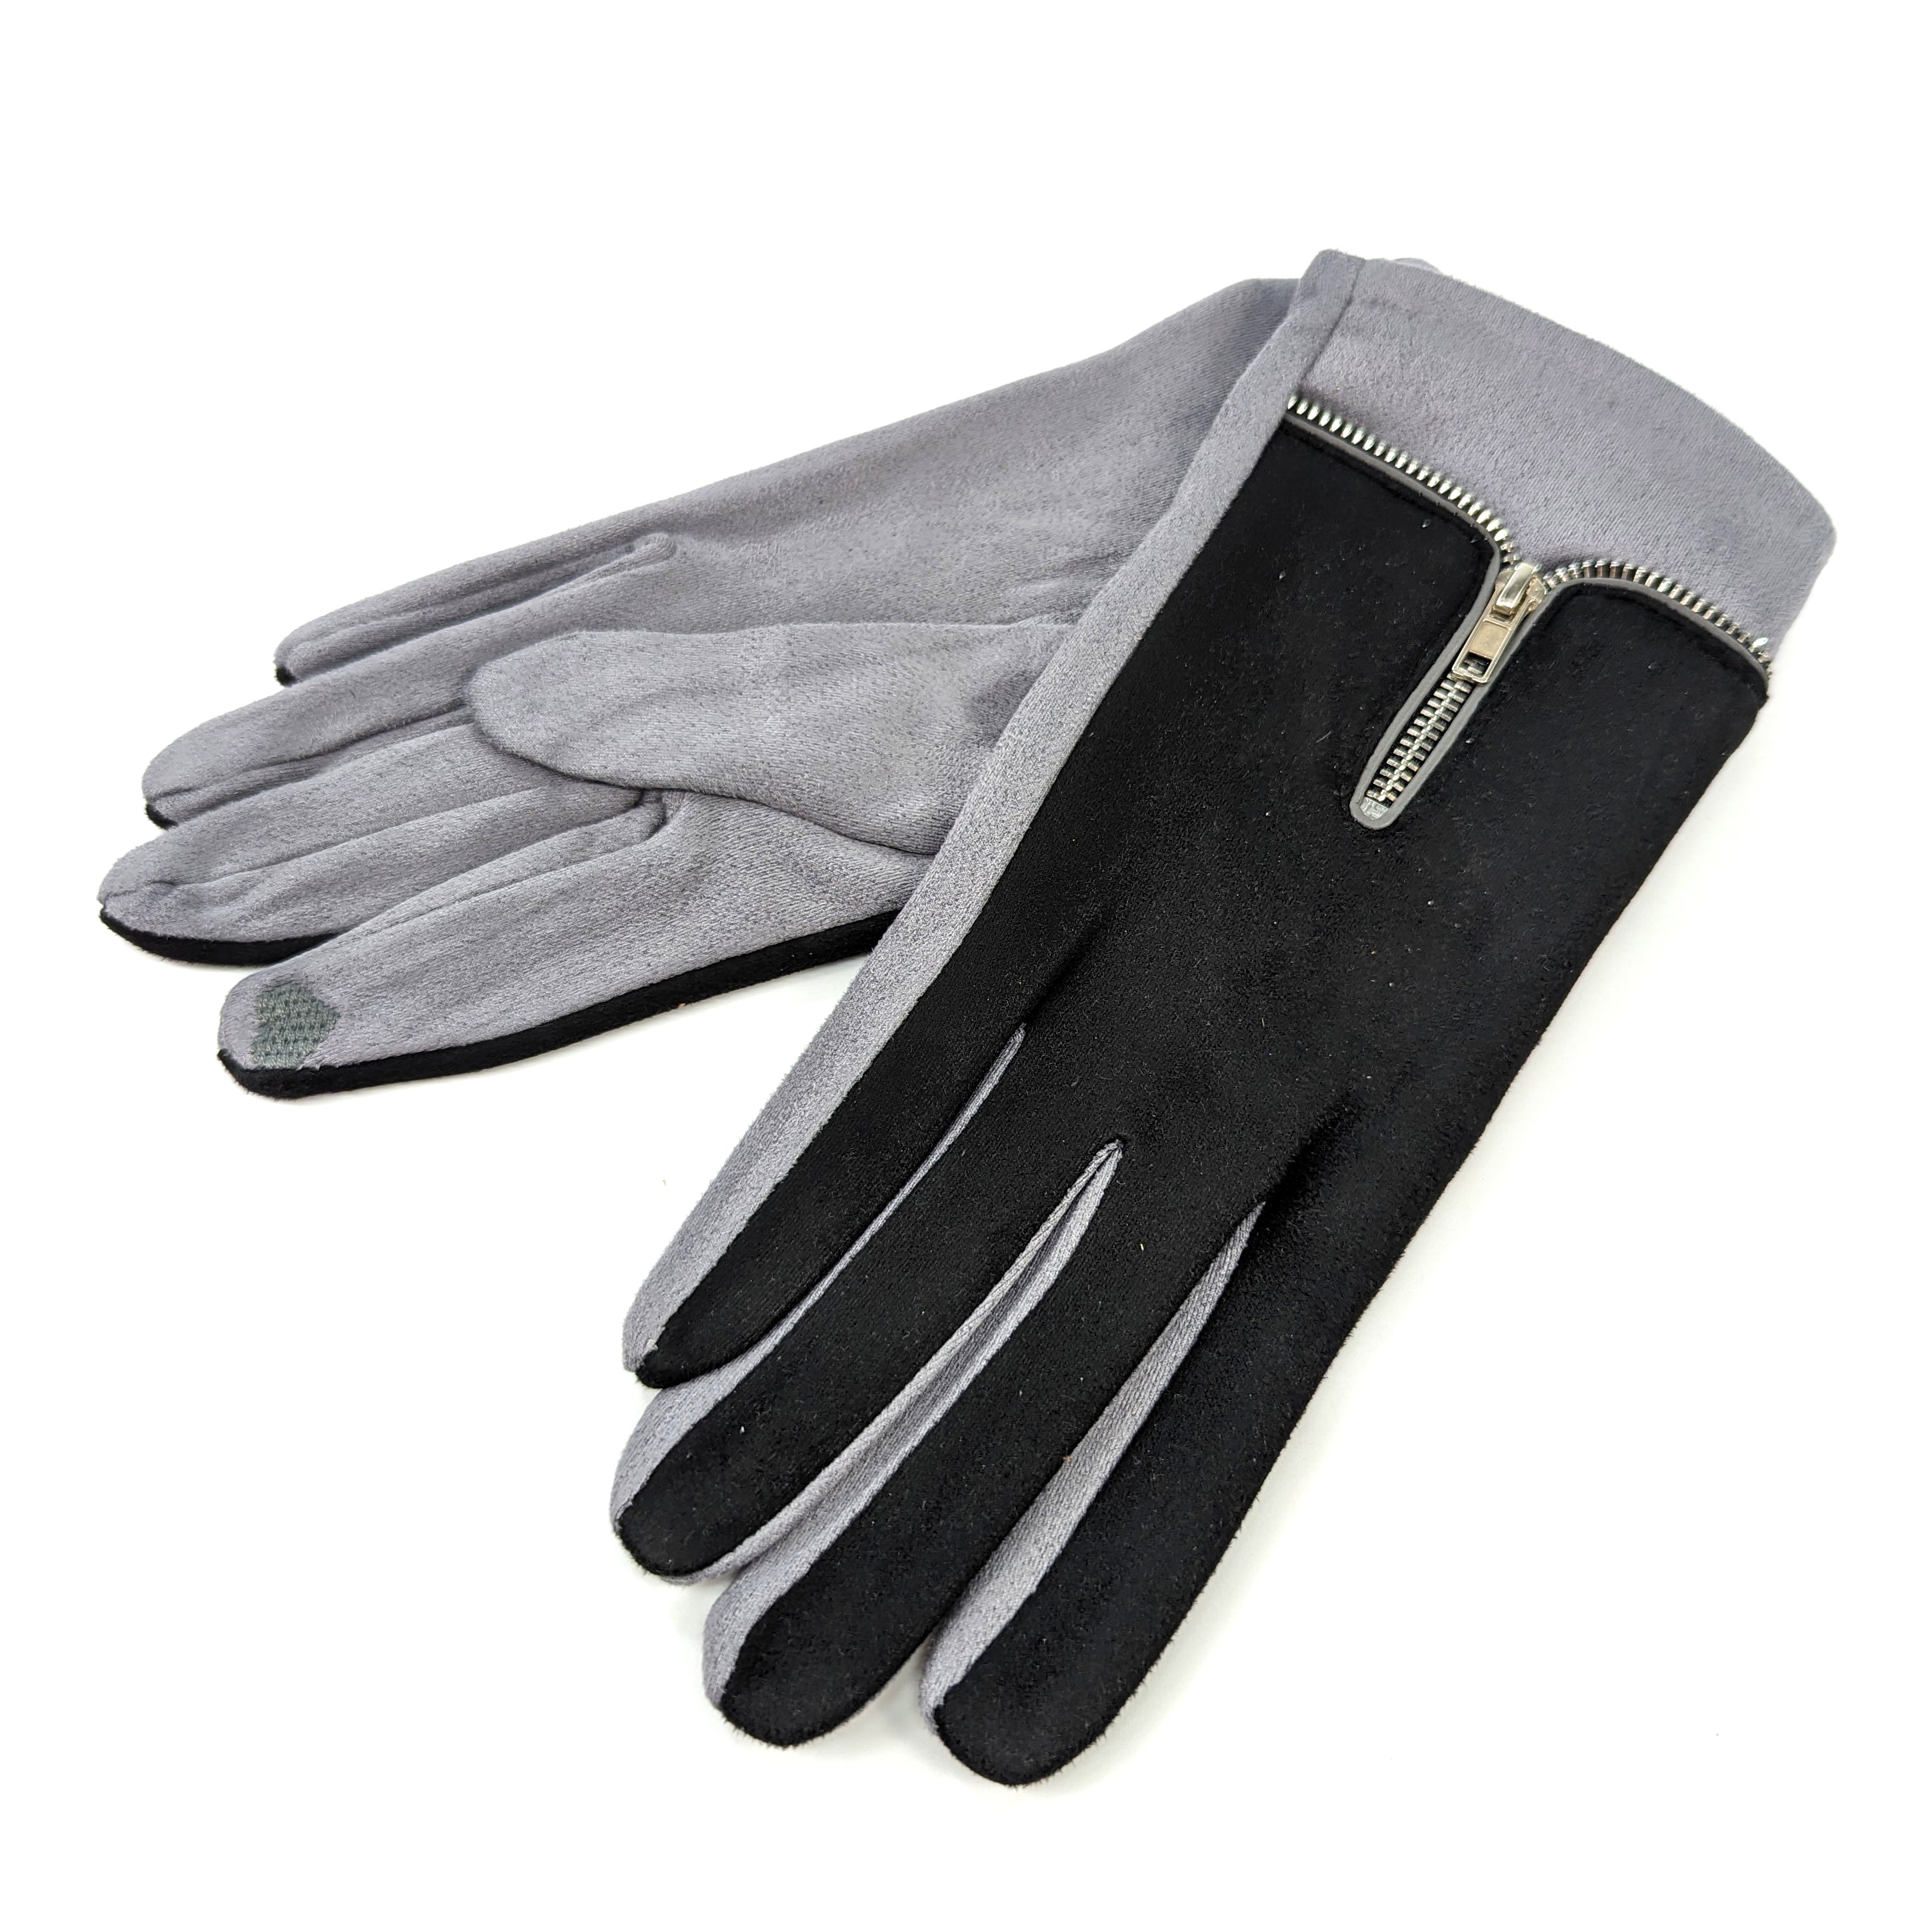 Gloves with a Zip Details - Black / Grey